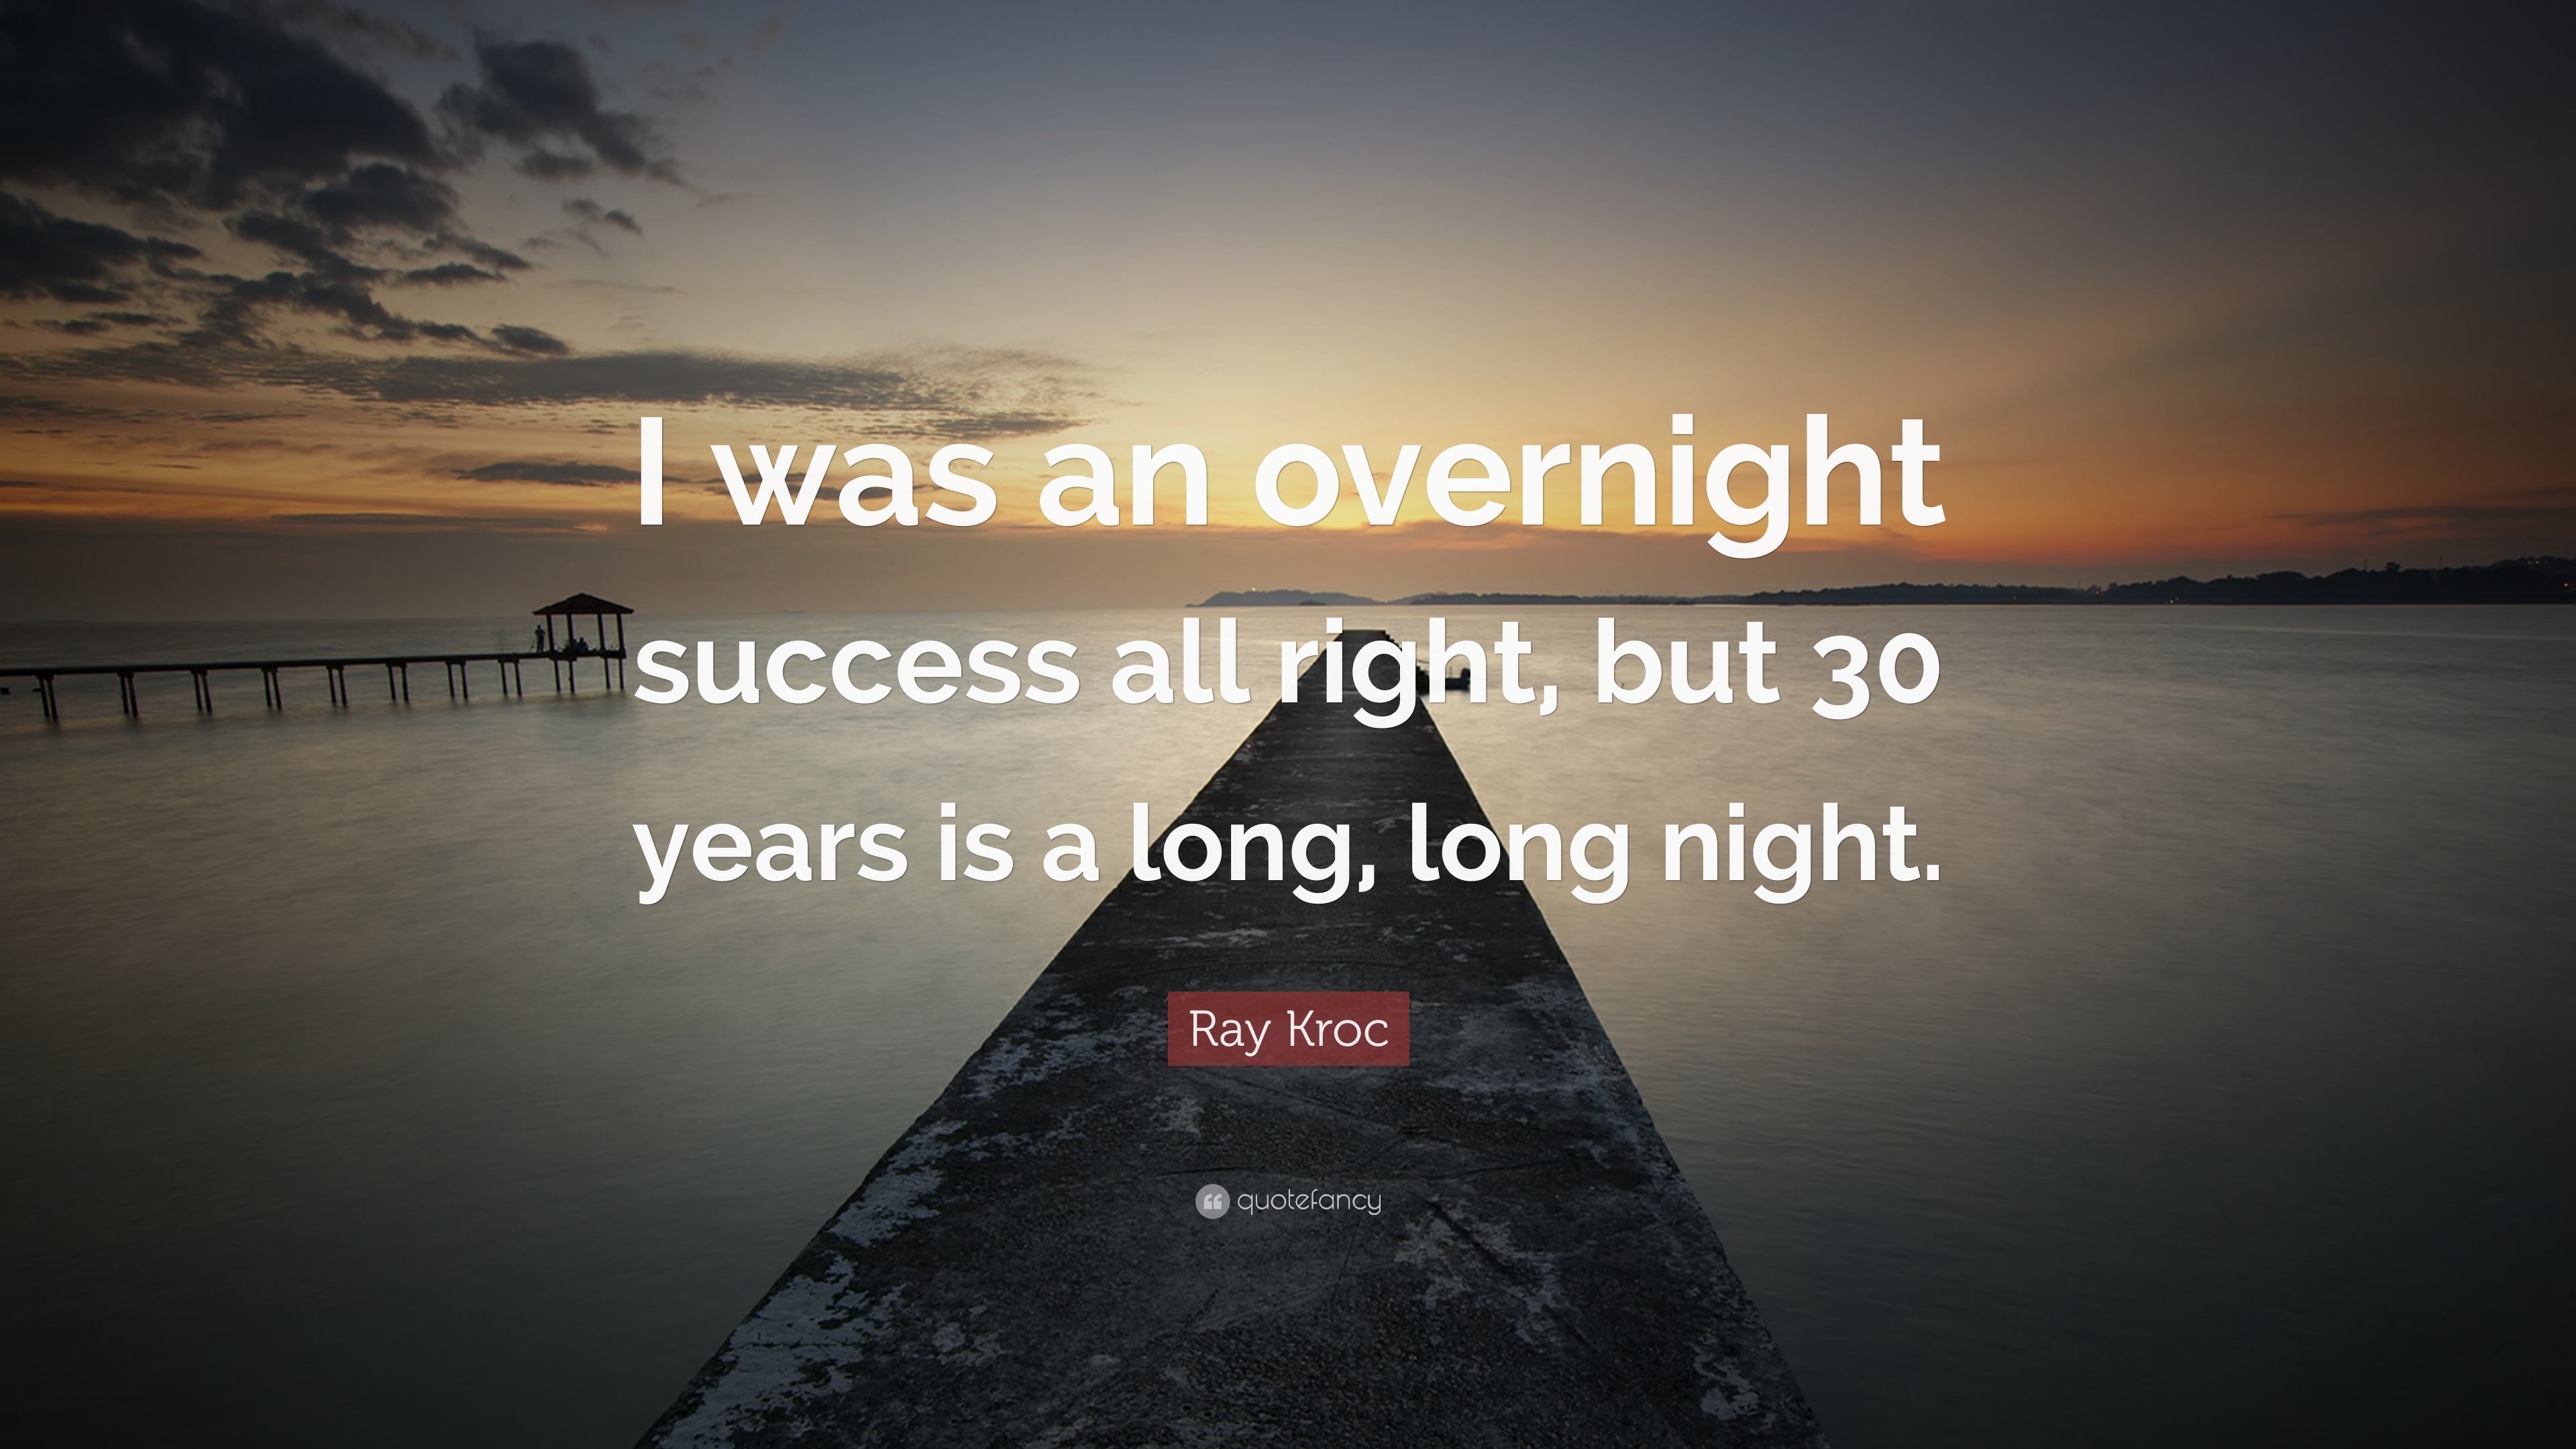 Ray Kroc Quote: “I was an overnight success all right, but 30 years is